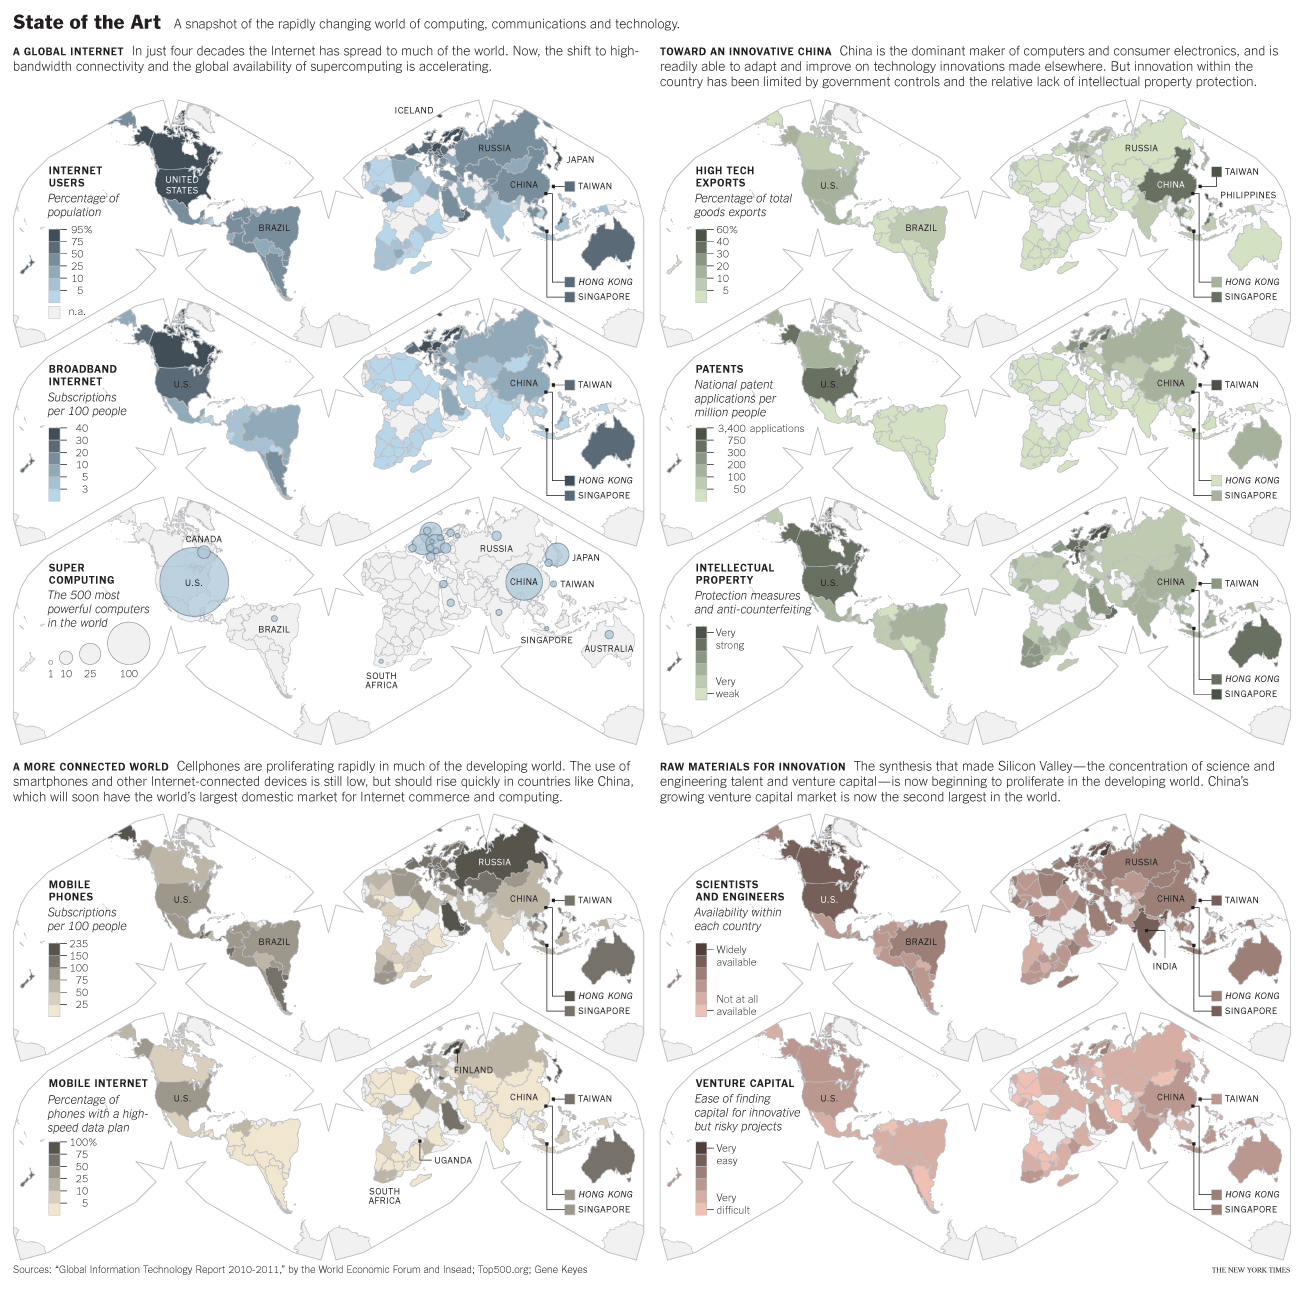 Ten New York Times IT maps, based on Cahill-Keyes projection